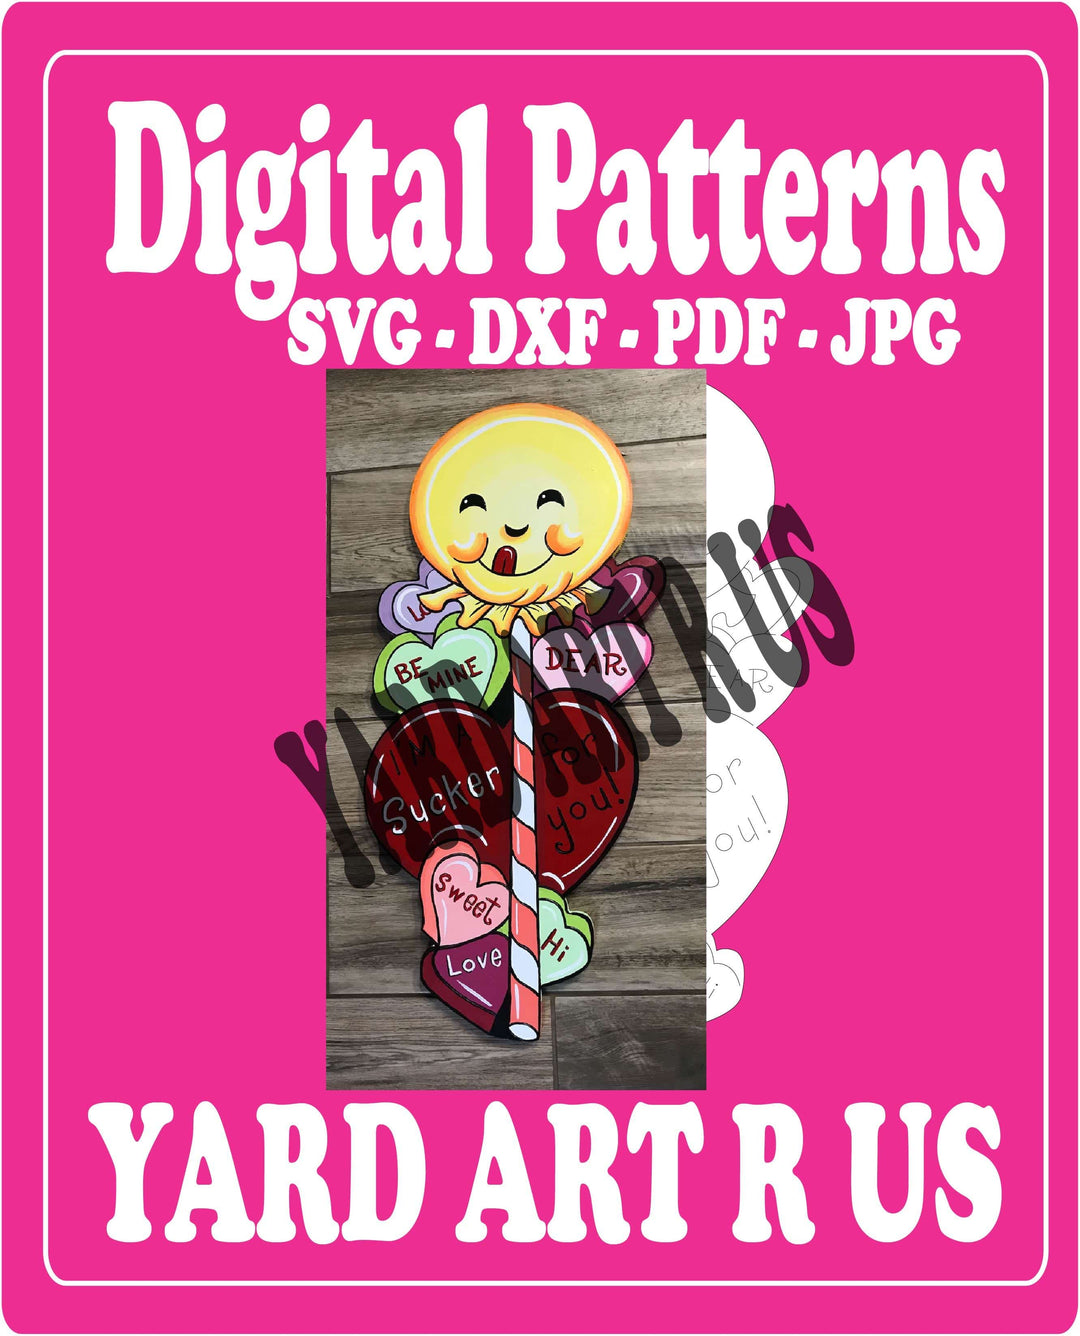 I'm a Sucker for You, sucker digital pattern' SVG, DXF, PDF, and JPG file options